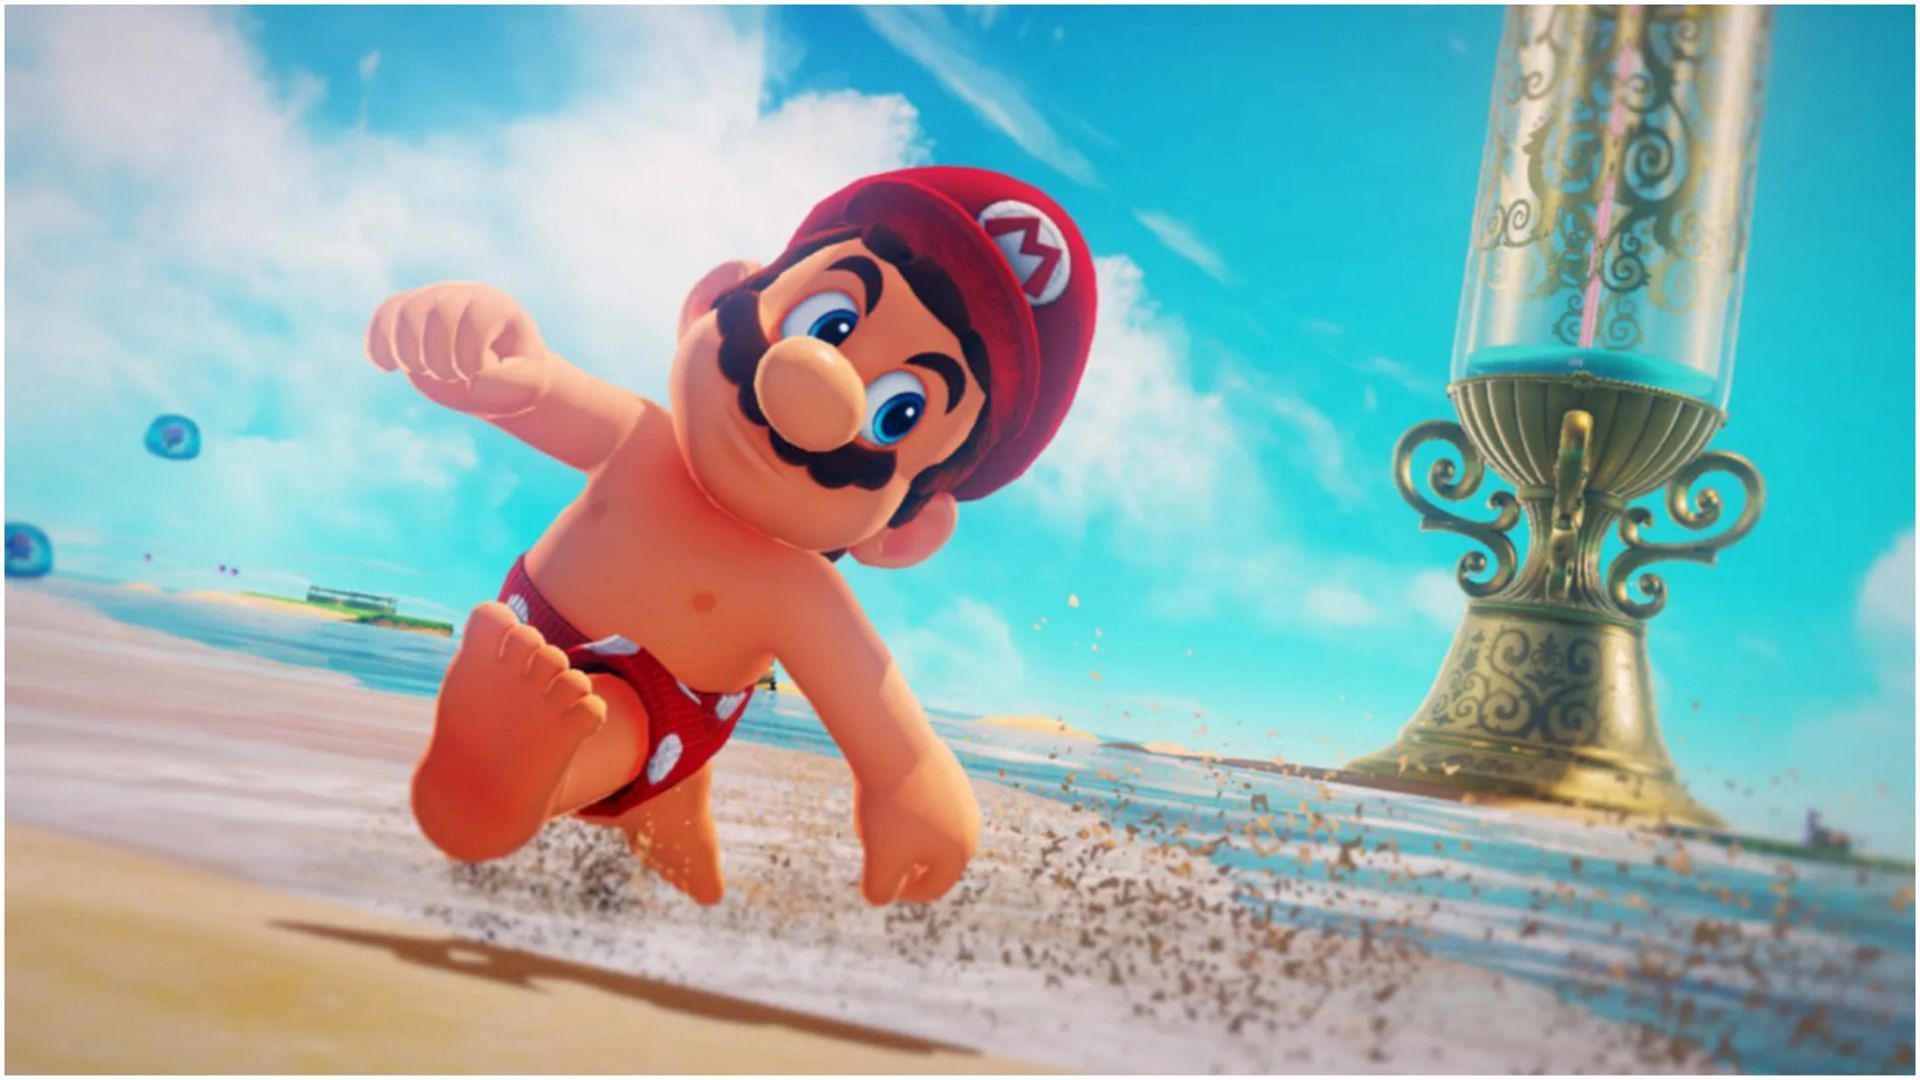 Mario is one of the longest-running video game characters (image via Nintendo)